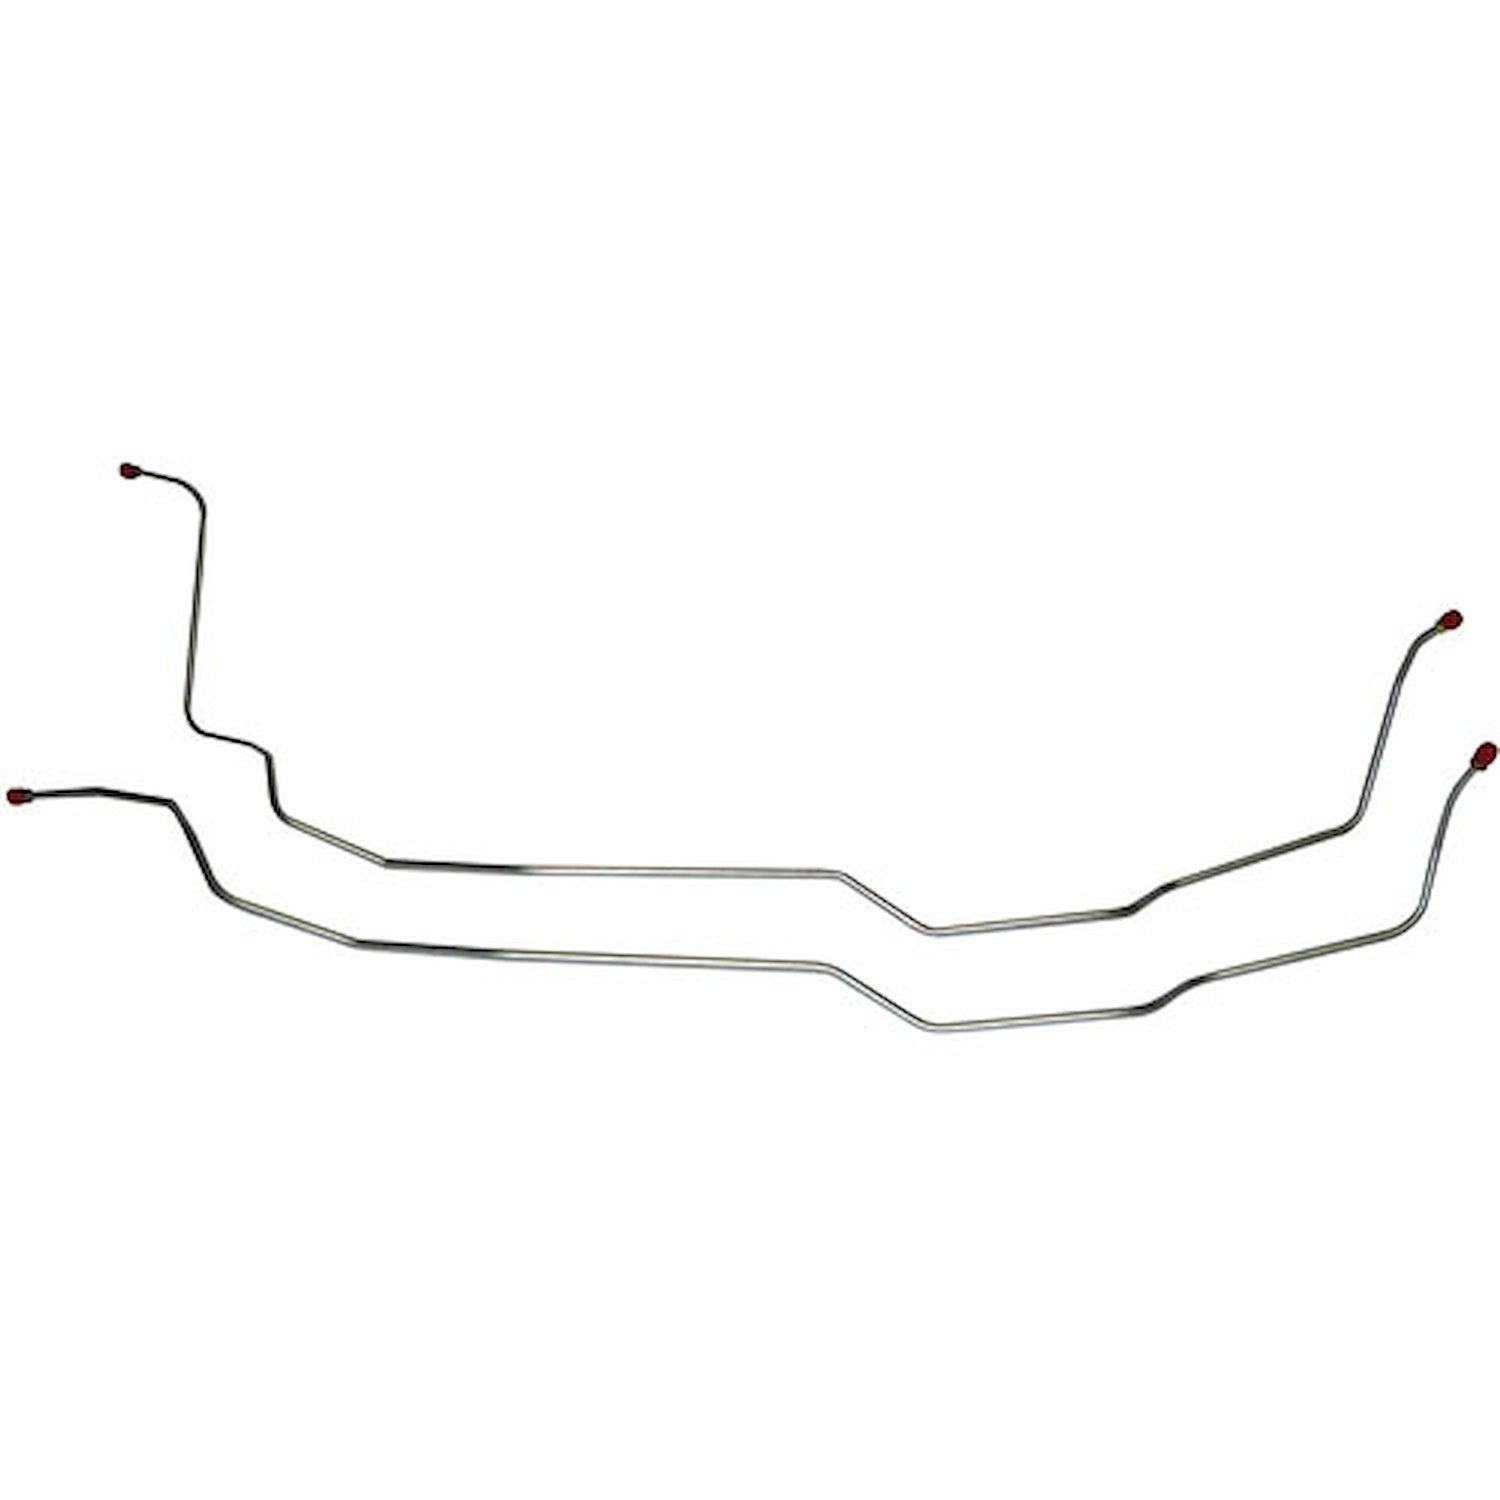 Rear Axle Brake Lines 2003 Chevy Truck 1/2